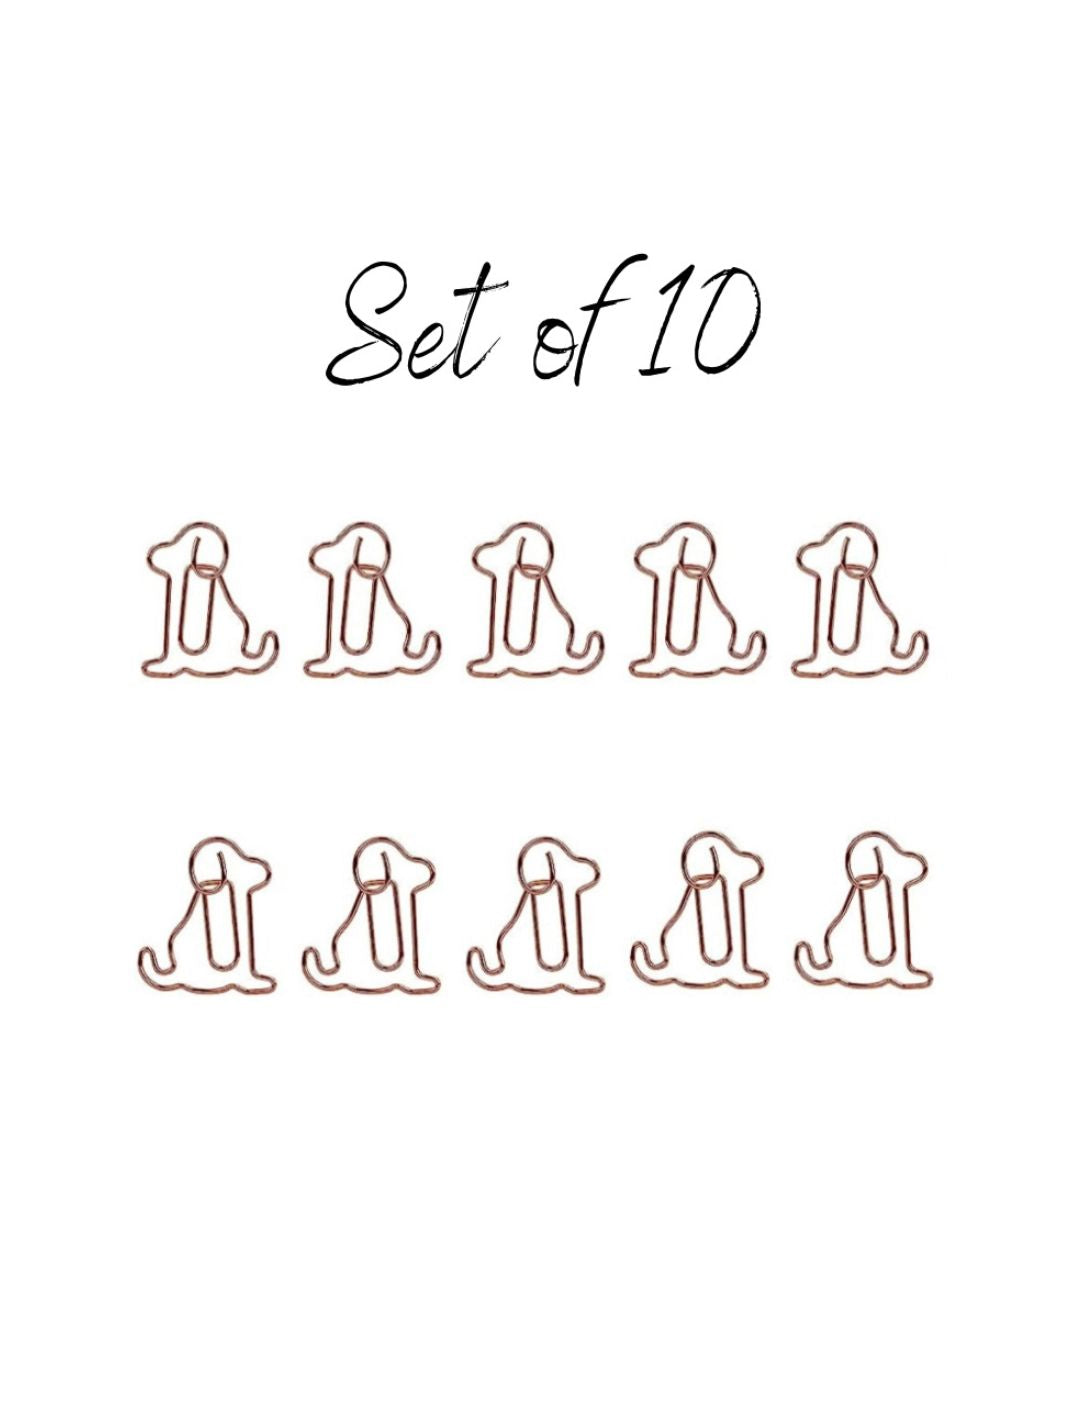 Paperclips for Dog Lovers - Rose Gold